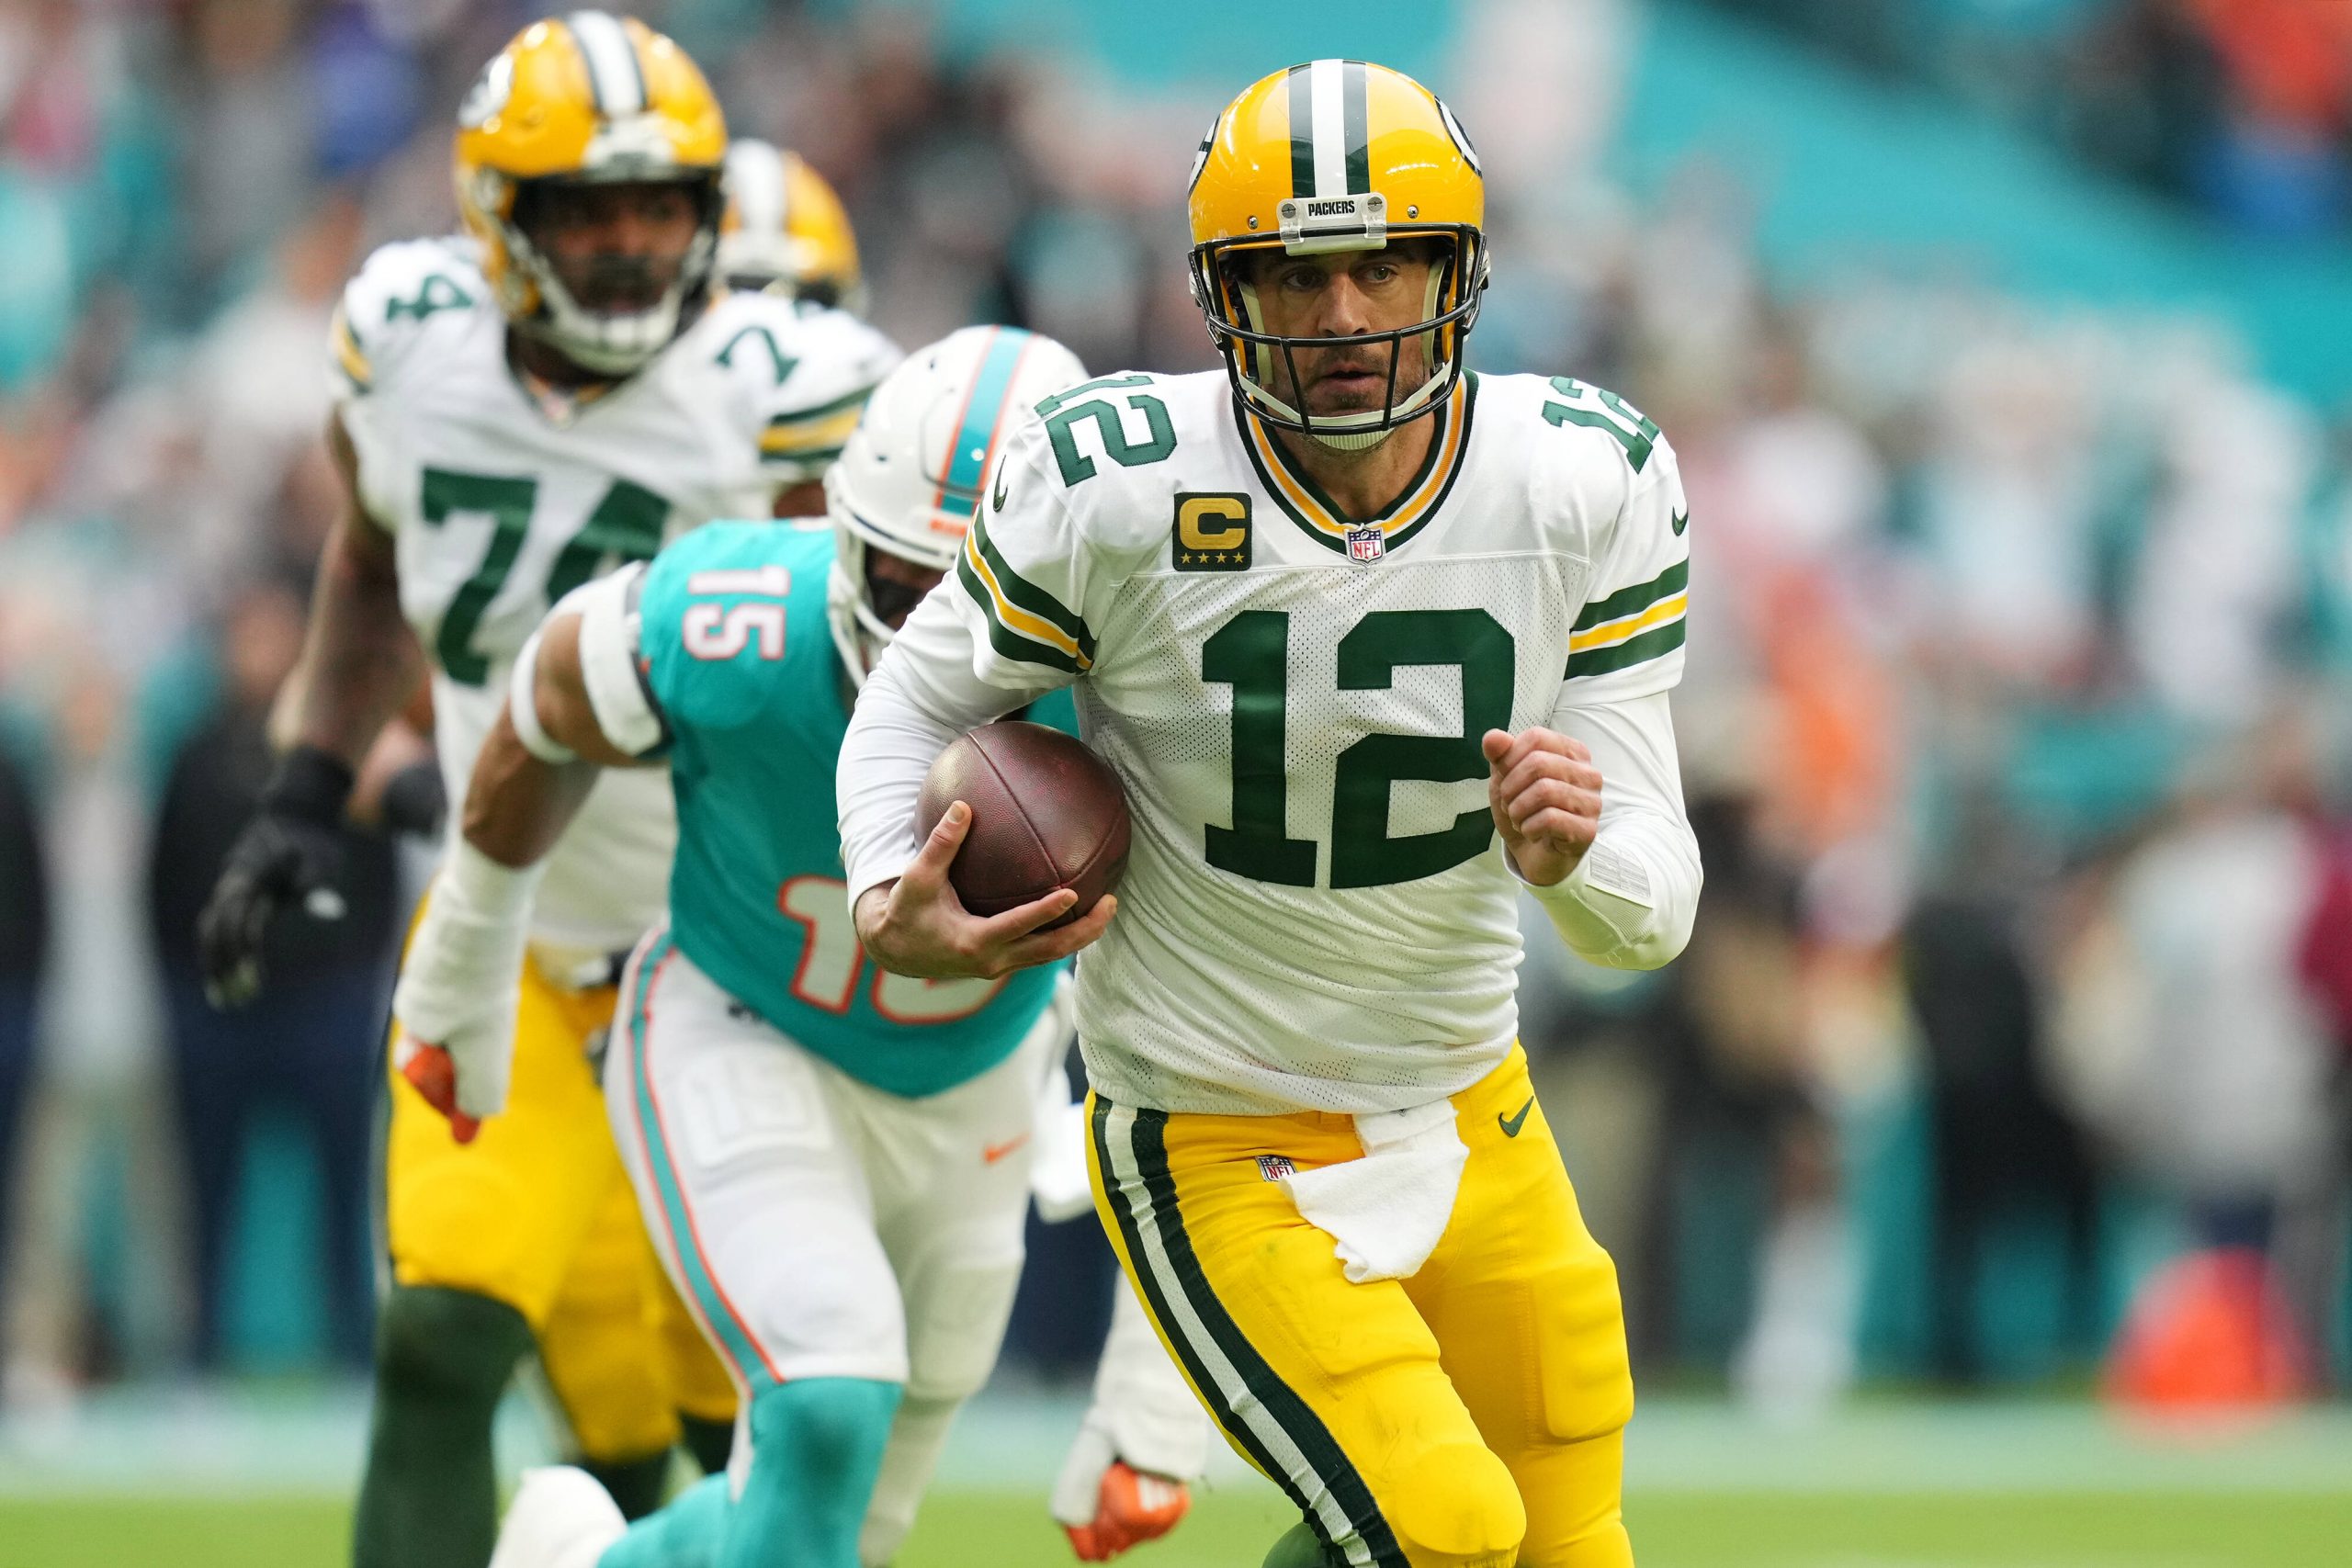 NFL, American Football Herren, USA Green Bay Packers at Miami Dolphins Dec 25, 2022 Miami Gardens, Florida, USA Green Bay Packers quarterback Aaron Rodgers 12 scrambles with the ball against the Miami Dolphins during the first half at Hard Rock Stadium. Miami Gardens Hard Rock Stadium Florida USA, EDITORIAL USE ONLY PUBLICATIONxINxGERxSUIxAUTxONLY Copyright: xJasenxVinlovex 20221225_jfv_bv1_051